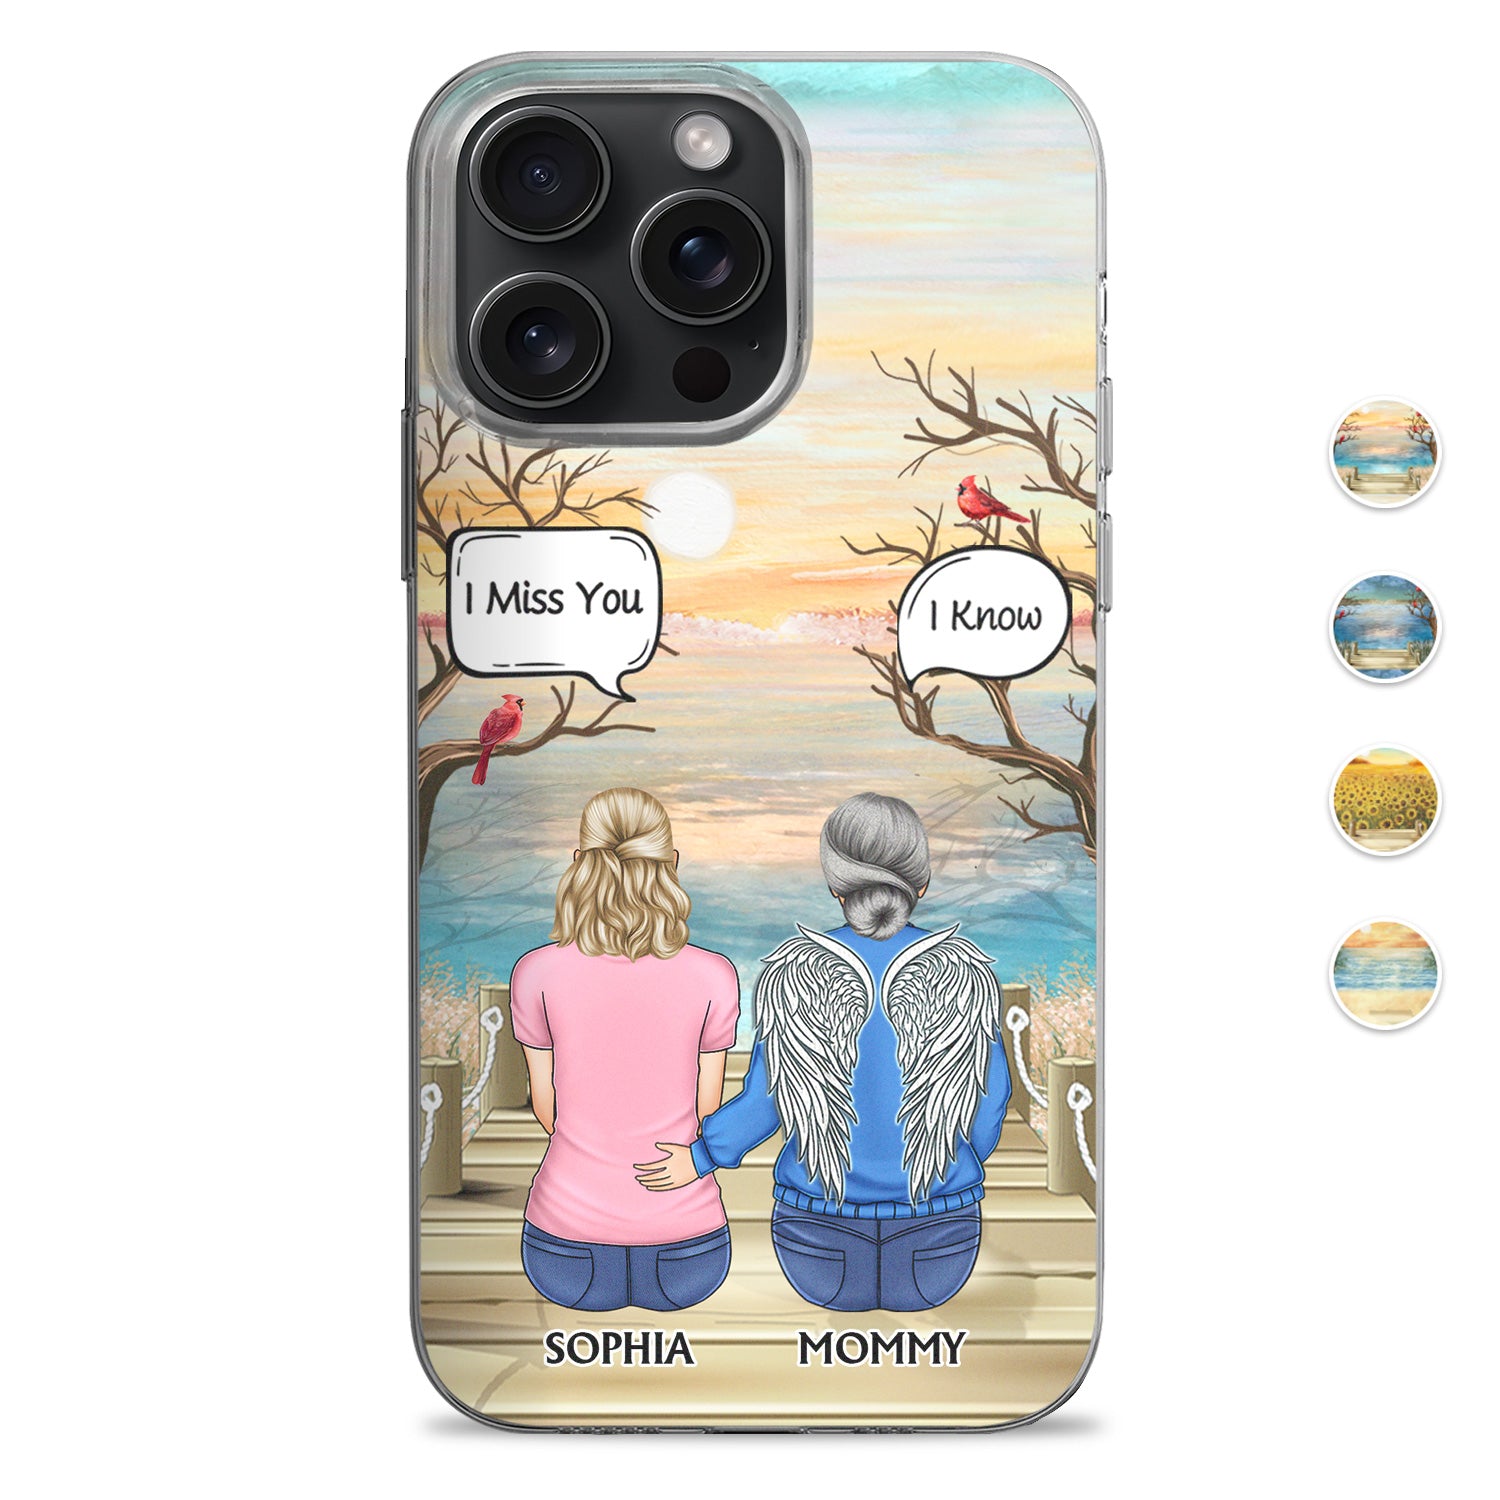 I Miss You I Know - Memorial Gift For Family, Friends, Siblings - Personalized Clear Phone Case